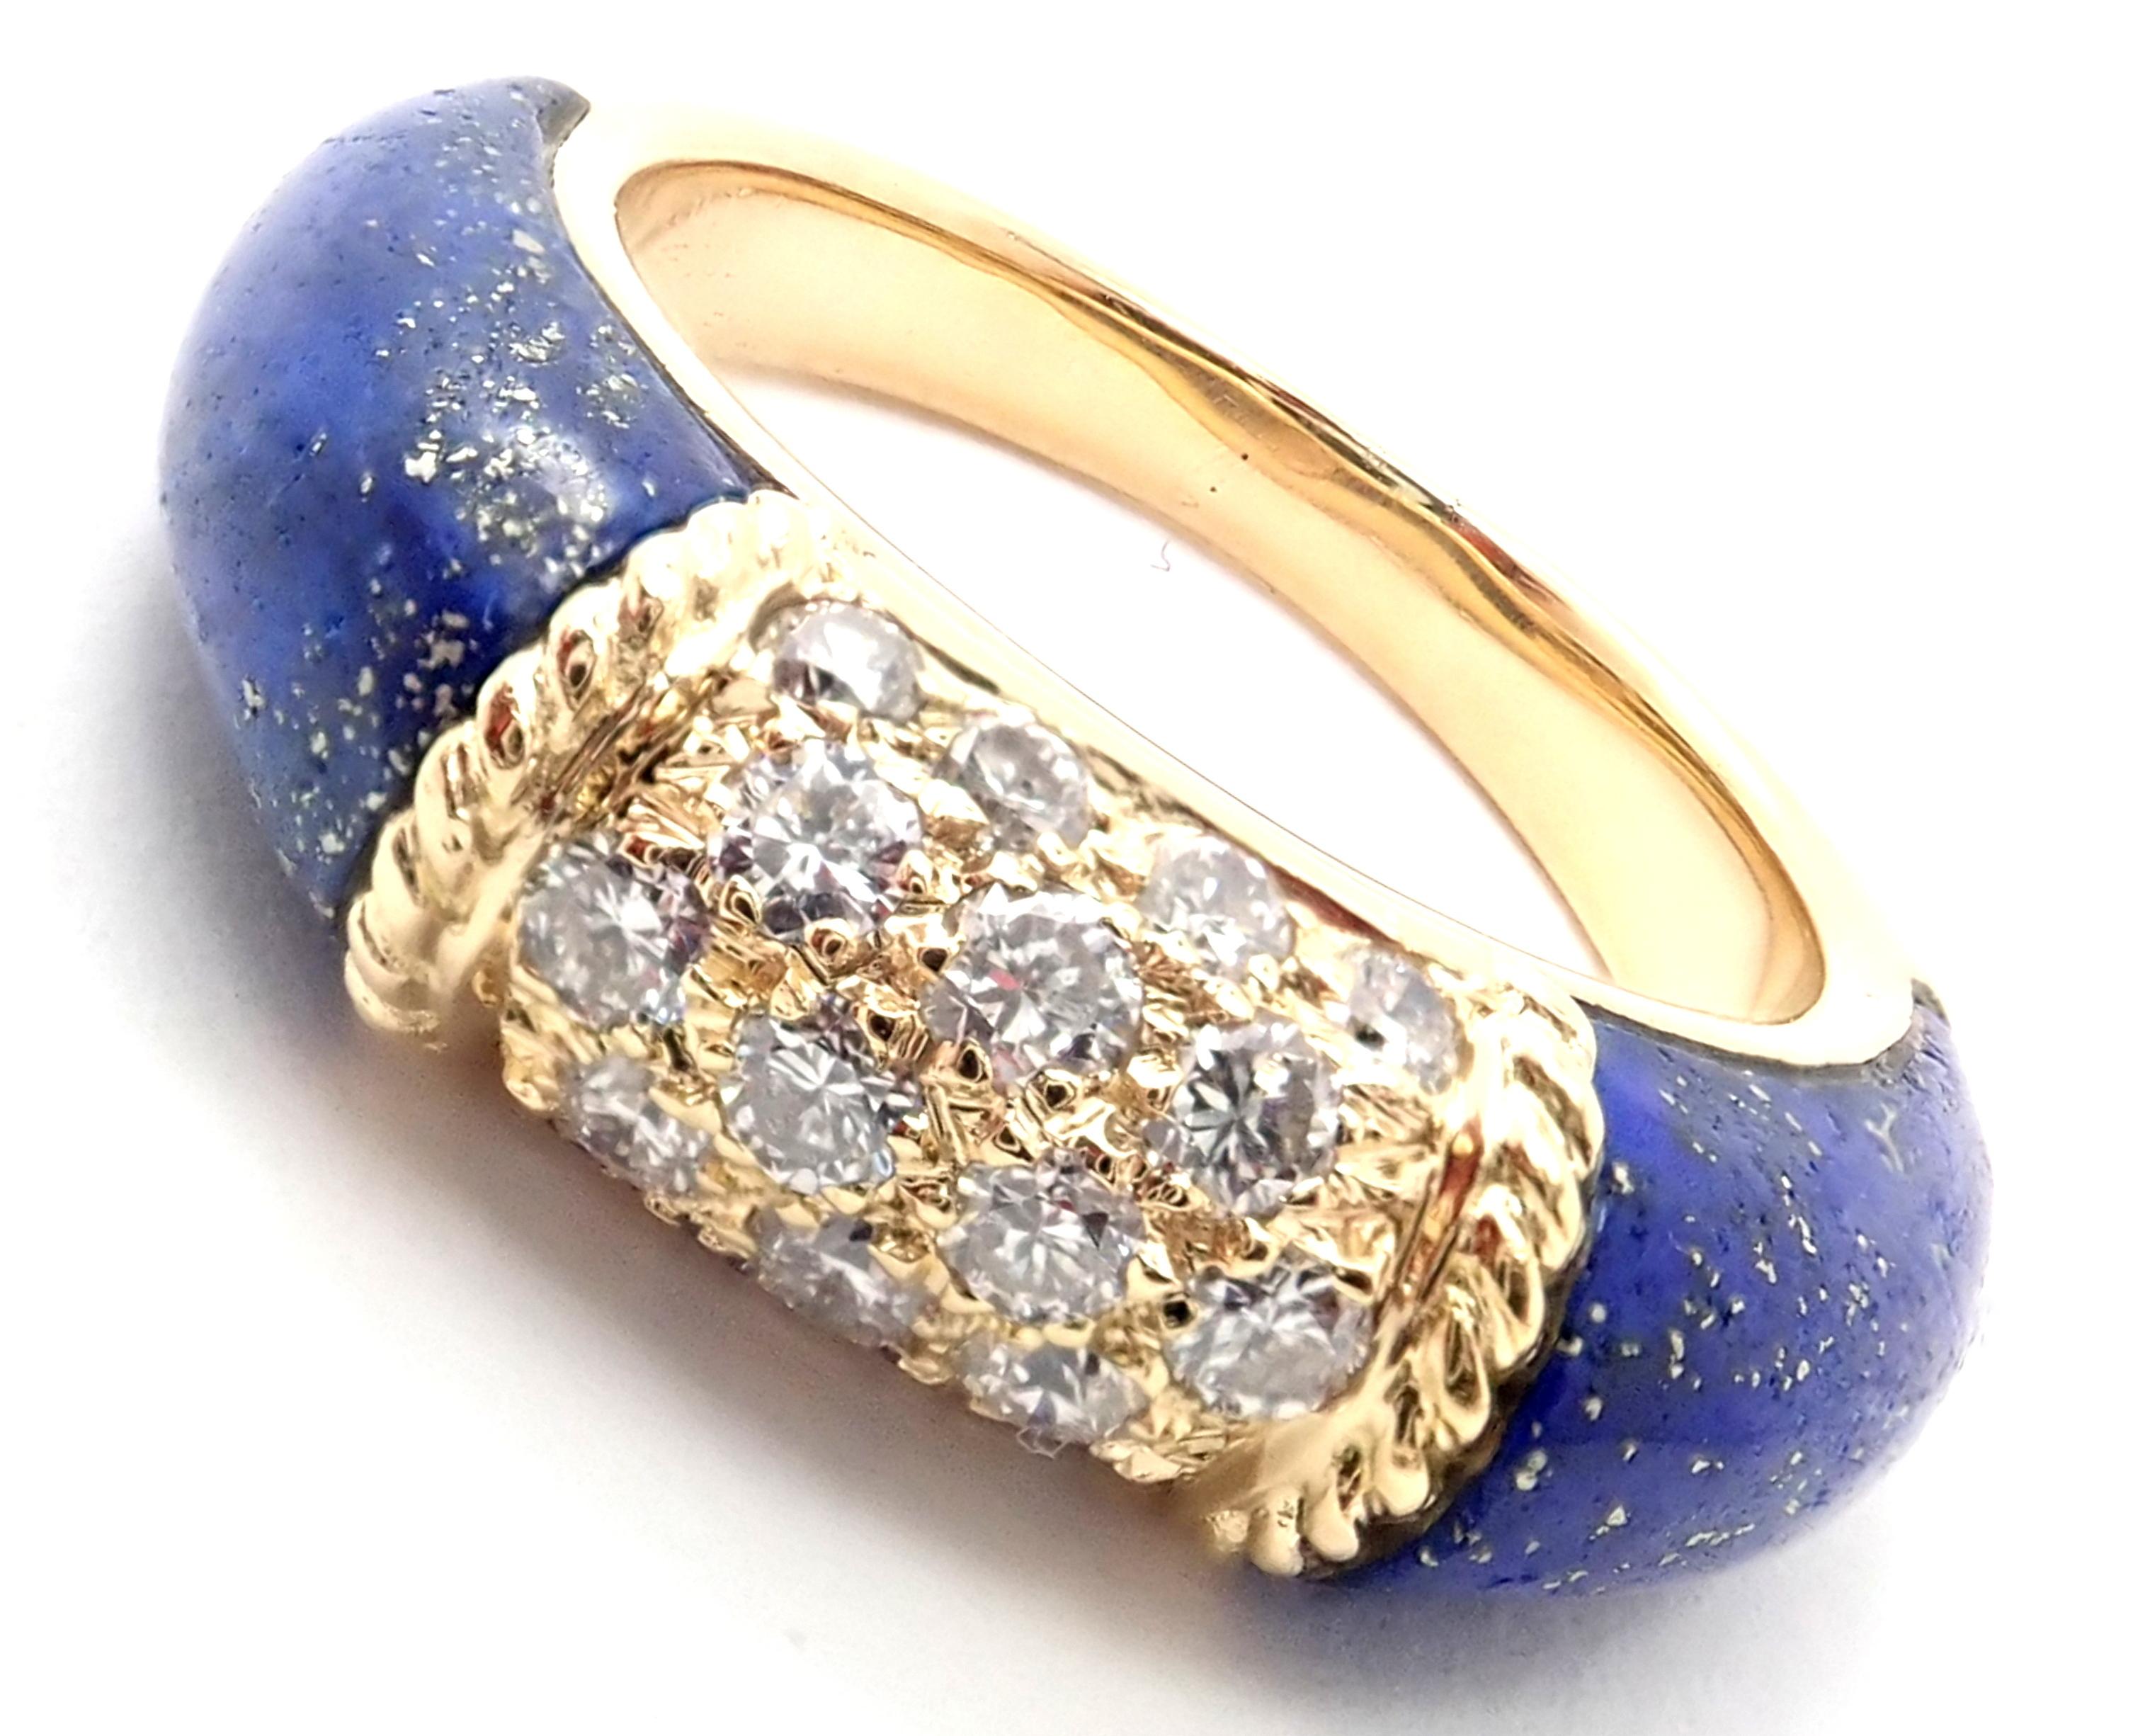 18k Yellow Gold Diamond & Lapis Lazuli Philippine Band Ring by Van Cleef & Arpels. 
With 18 round brilliant cut diamond VS1 clarity, G color total weight .50ct. 
And 2 beautiful lapis lazuli stones 14mm x 7mm.
Details: 
Ring Size: 5 3/4
Weight: 8